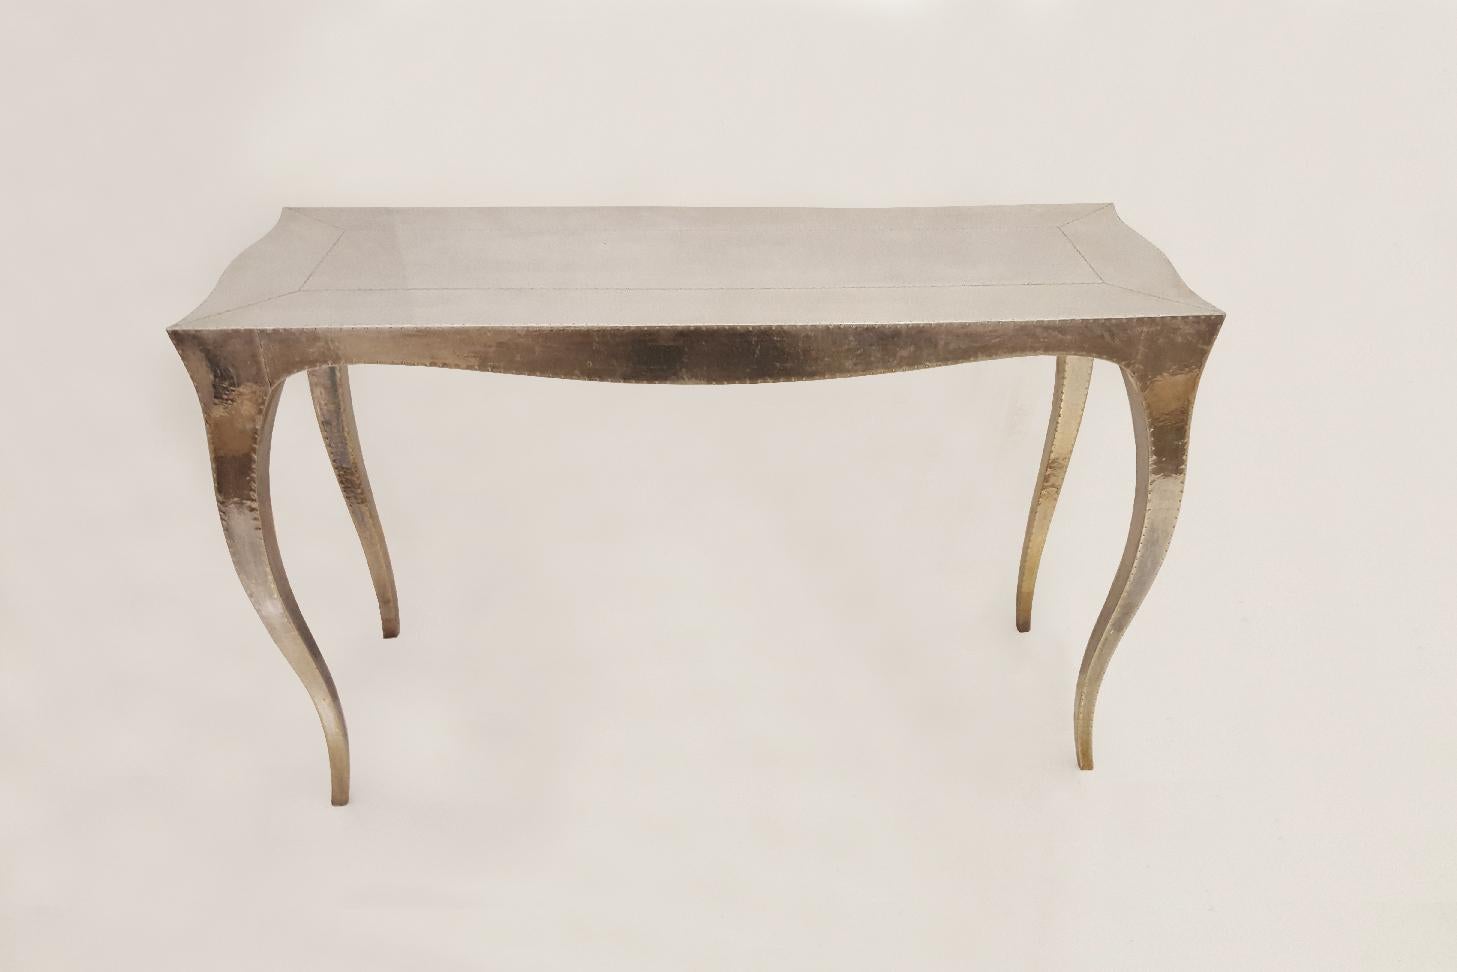 Louise Console Art Deco Card and Tea Tables Mid. Hammered Copper by Paul Mathieu For Sale 5